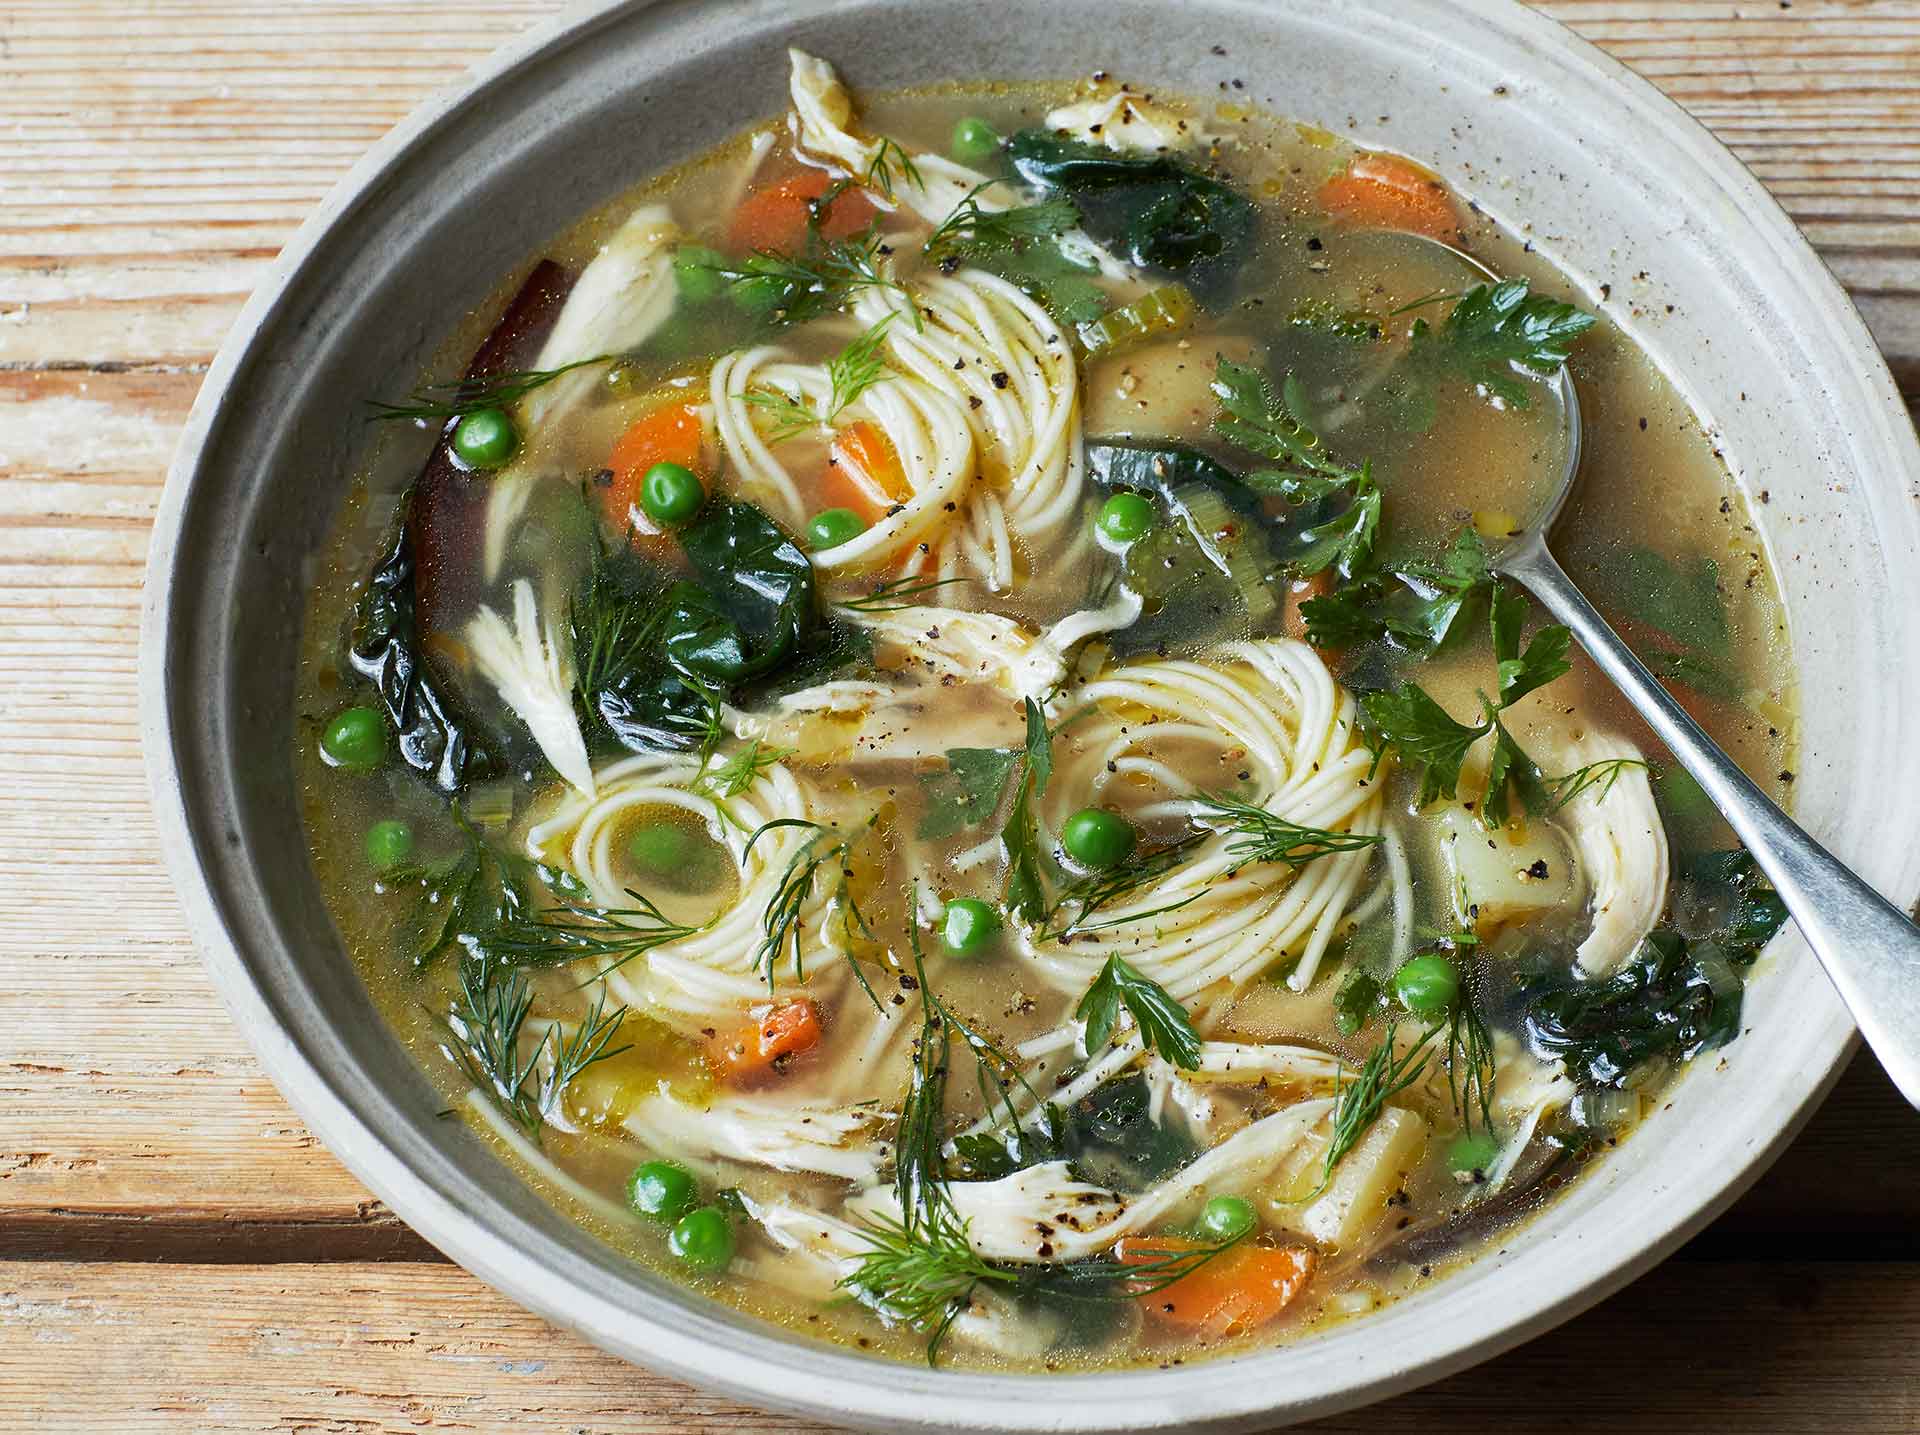 Eco-friendly cooking with Rescue Noodle Soup with Leftover Chicken from "Eat Green"